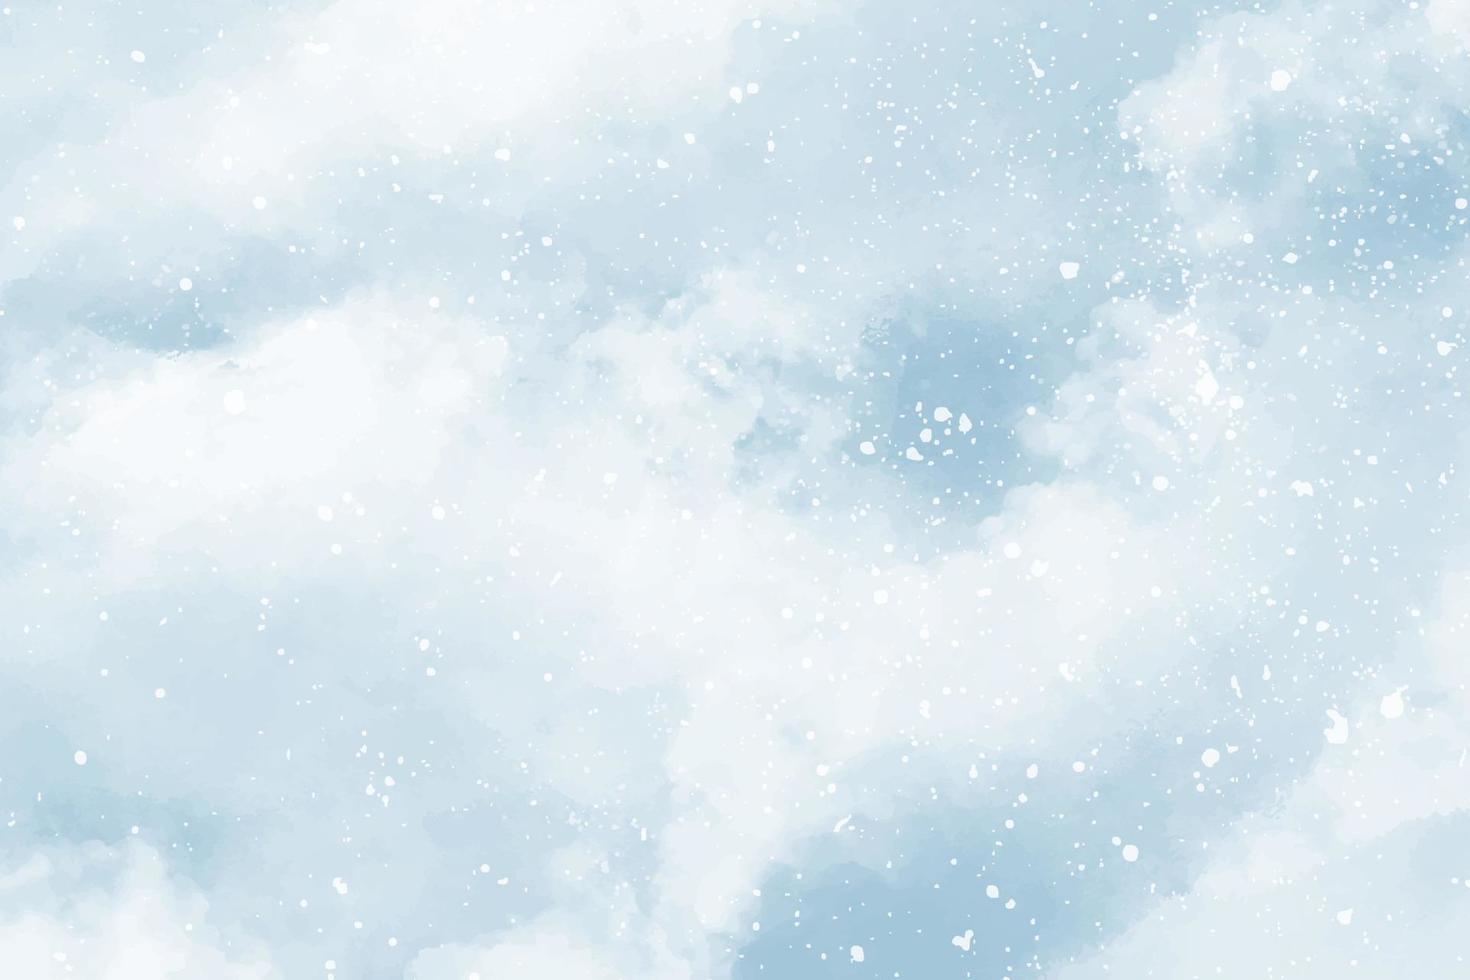 Abstract blue winter watercolor background. Sky pattern with snow vector